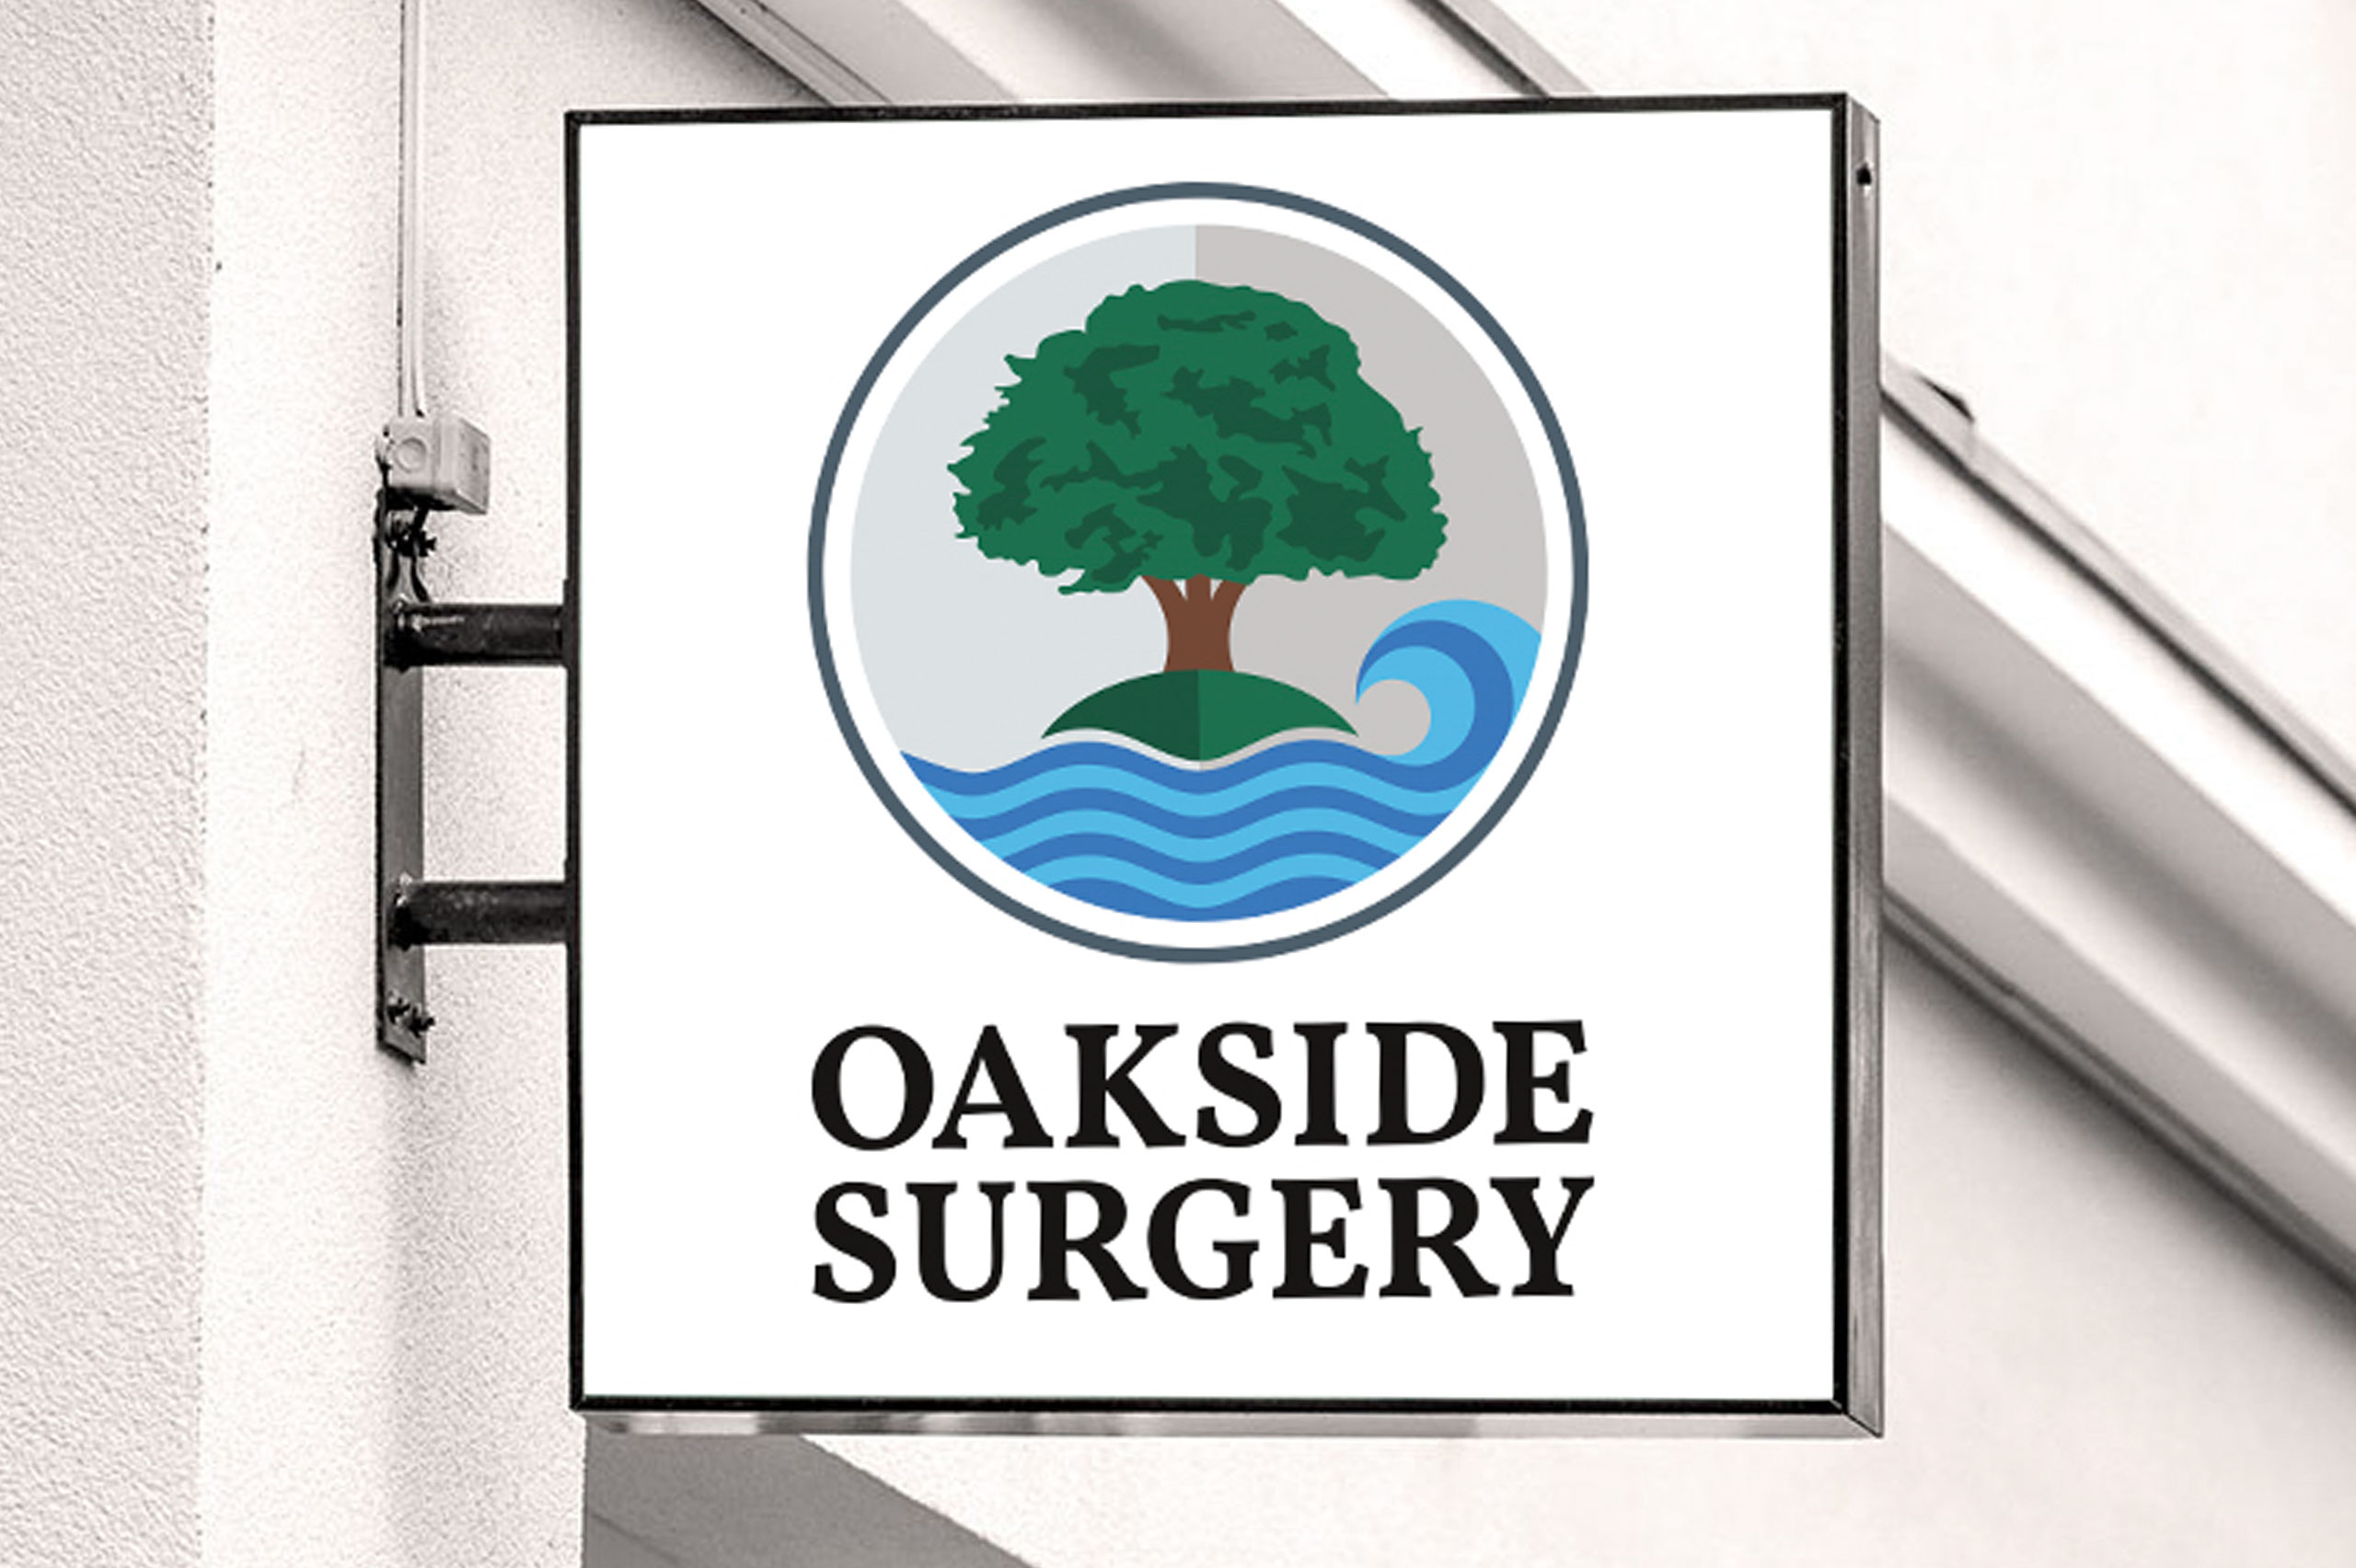 Logo Design for Oakside Surgery.  Made by Jon Glanville - Plymouth Graphic Designer.